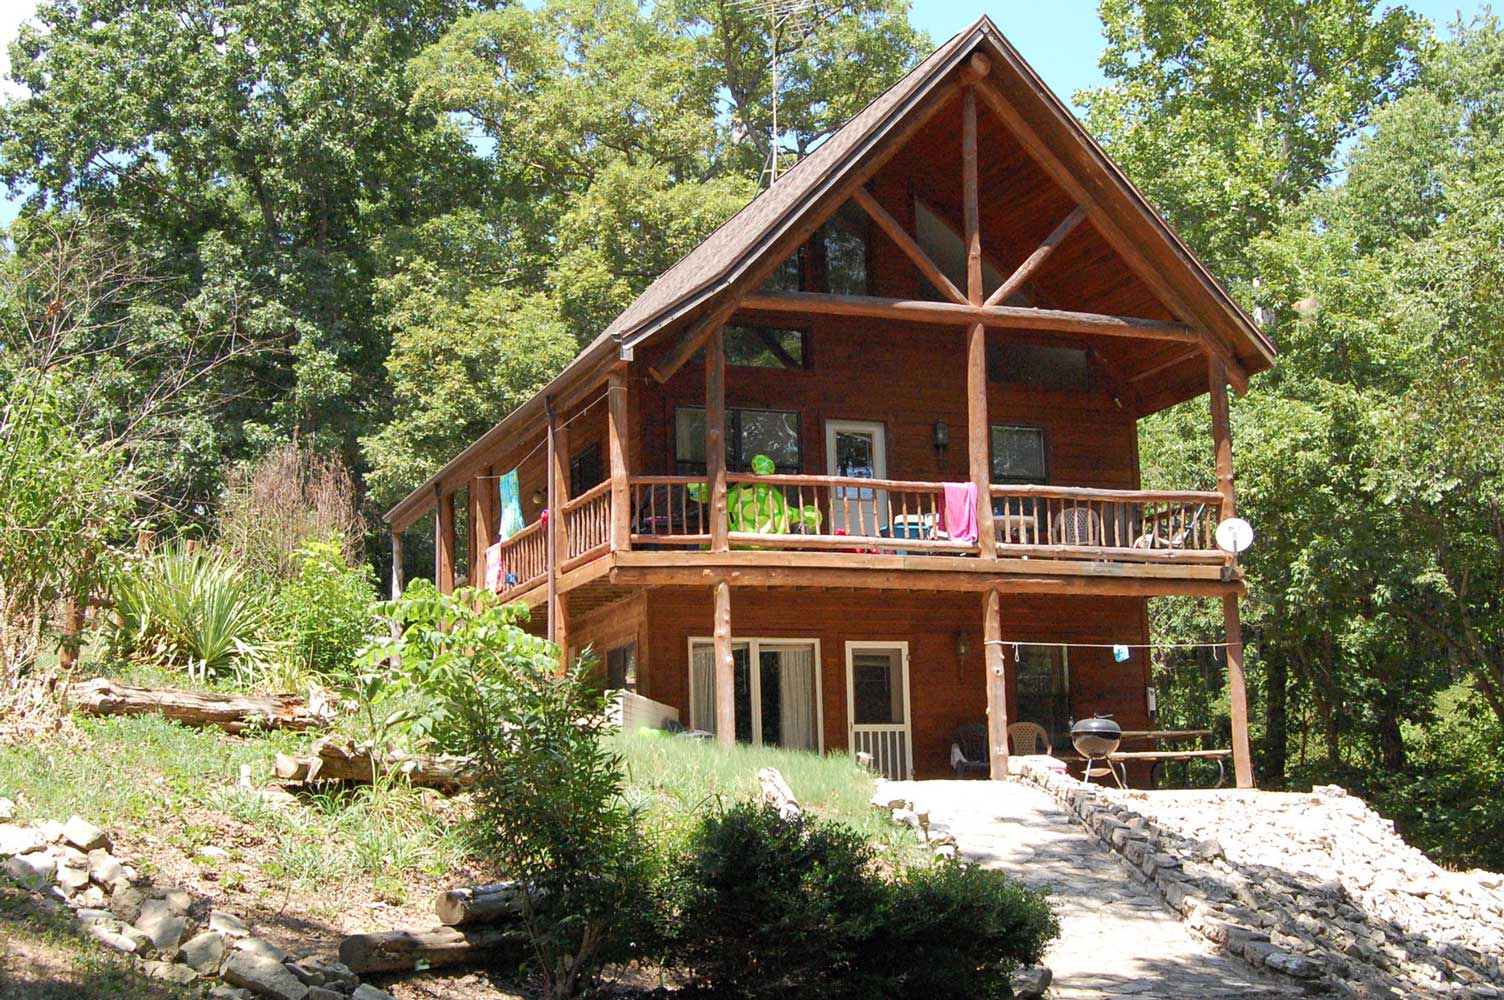 table rock lake hickory hollow resort Cabin-9a9b-18